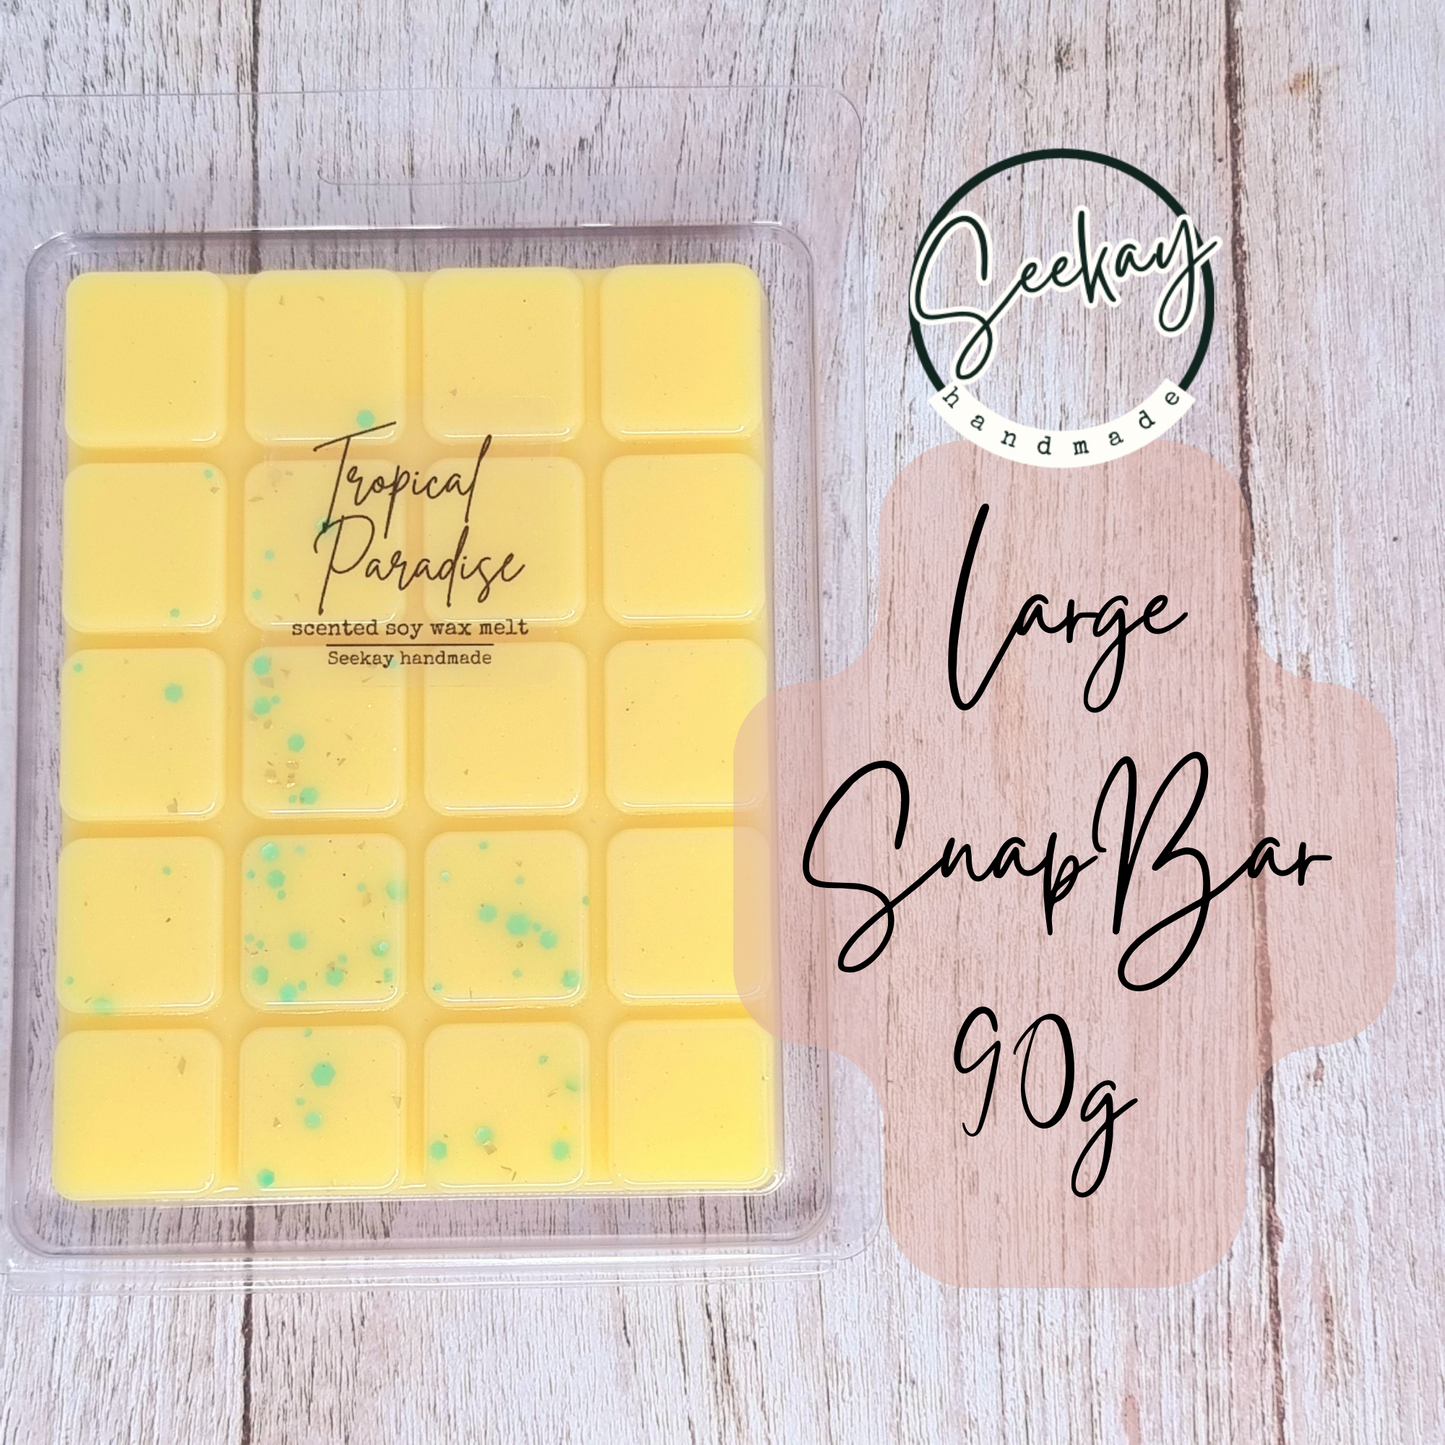 Tropical Paradise scented soy wax melt